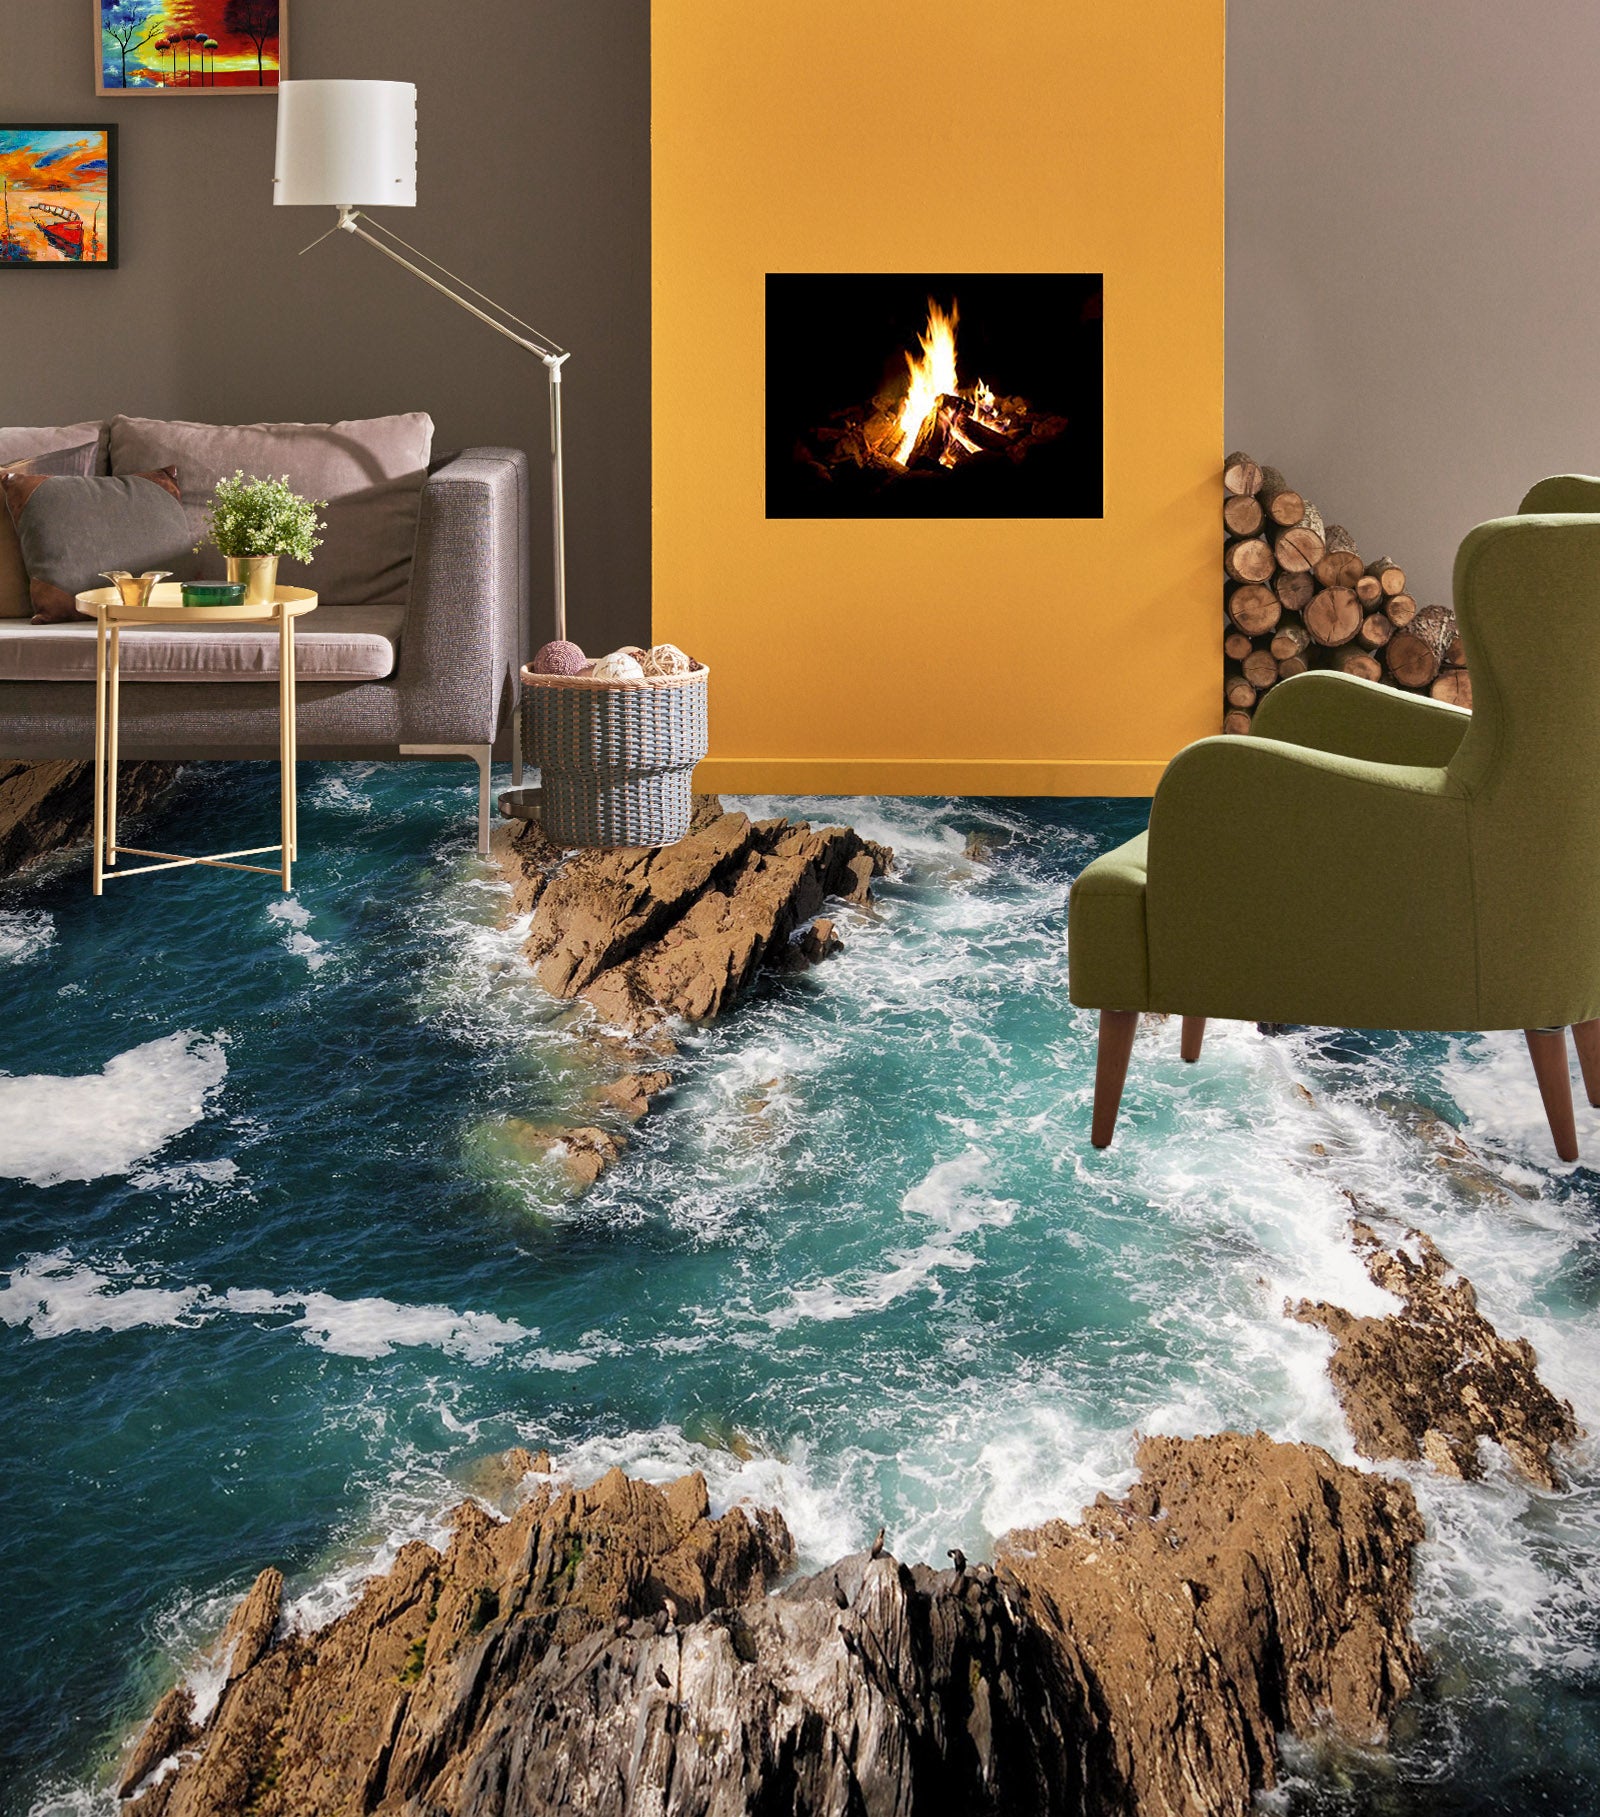 3D Collectible Memories Of The Sea 1427 Floor Mural  Wallpaper Murals Self-Adhesive Removable Print Epoxy